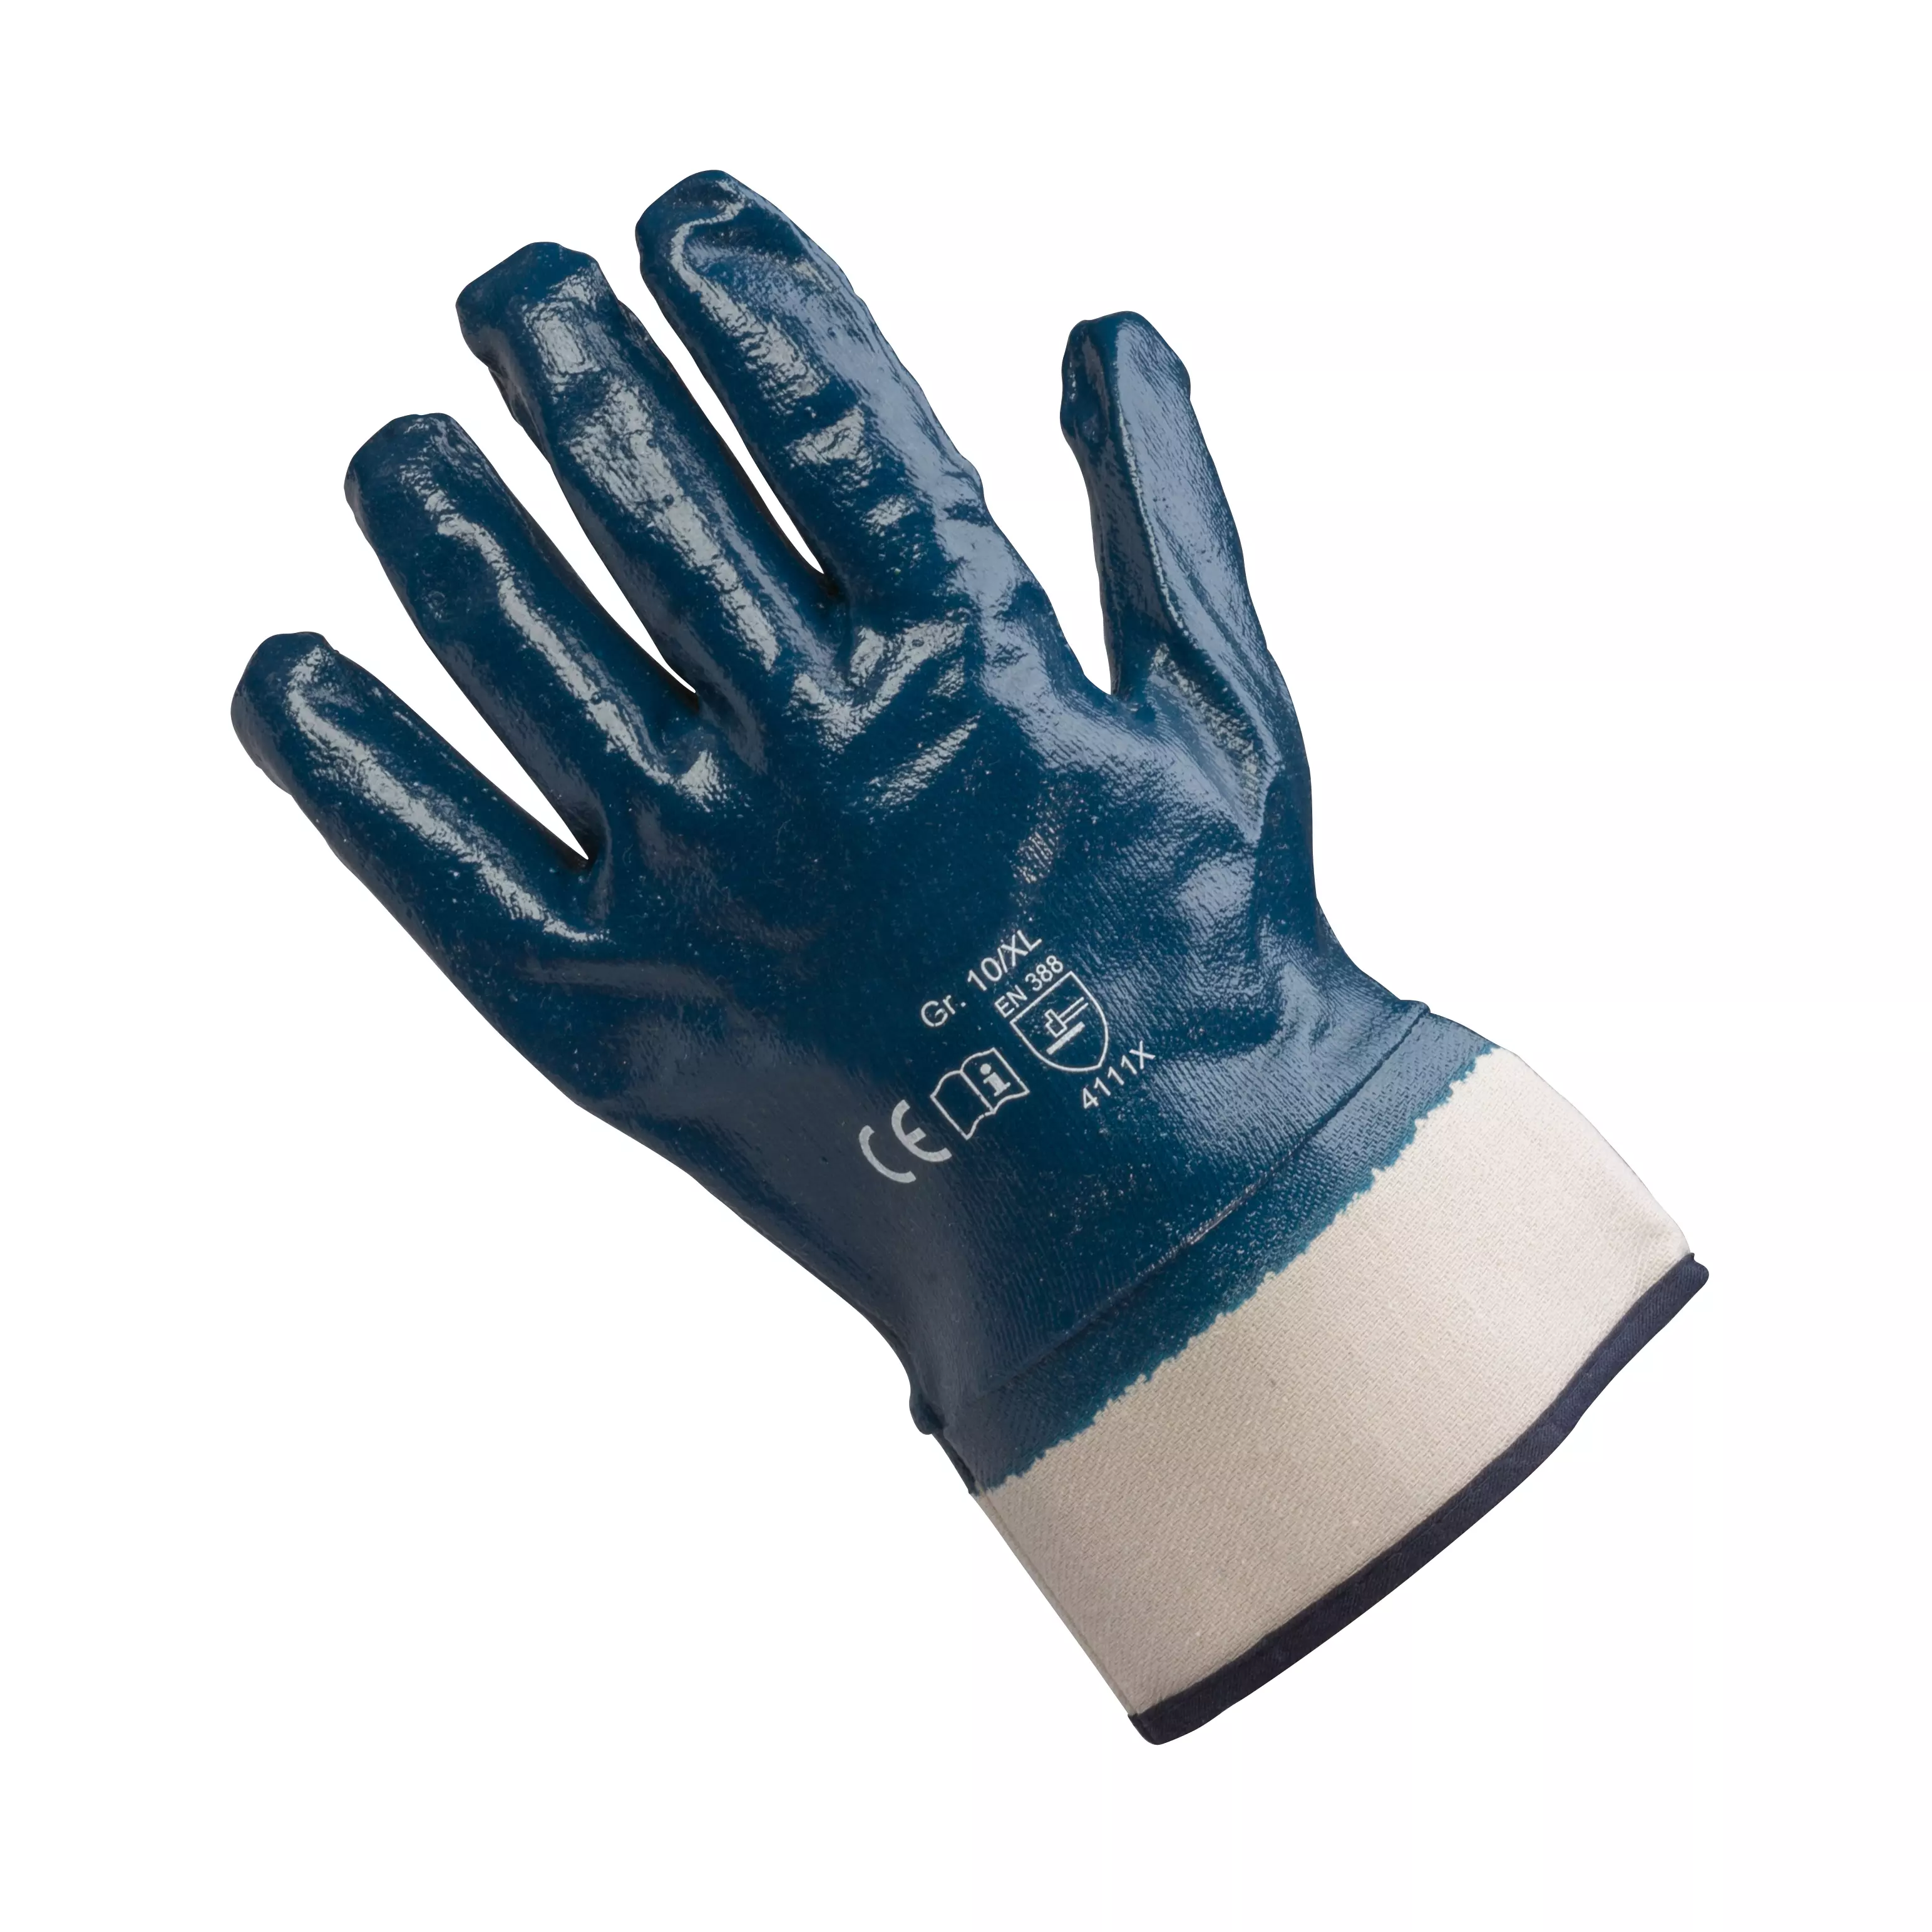 Assembly glove Comfort Jersey Nitrile Plus, size 10, 12 pairs